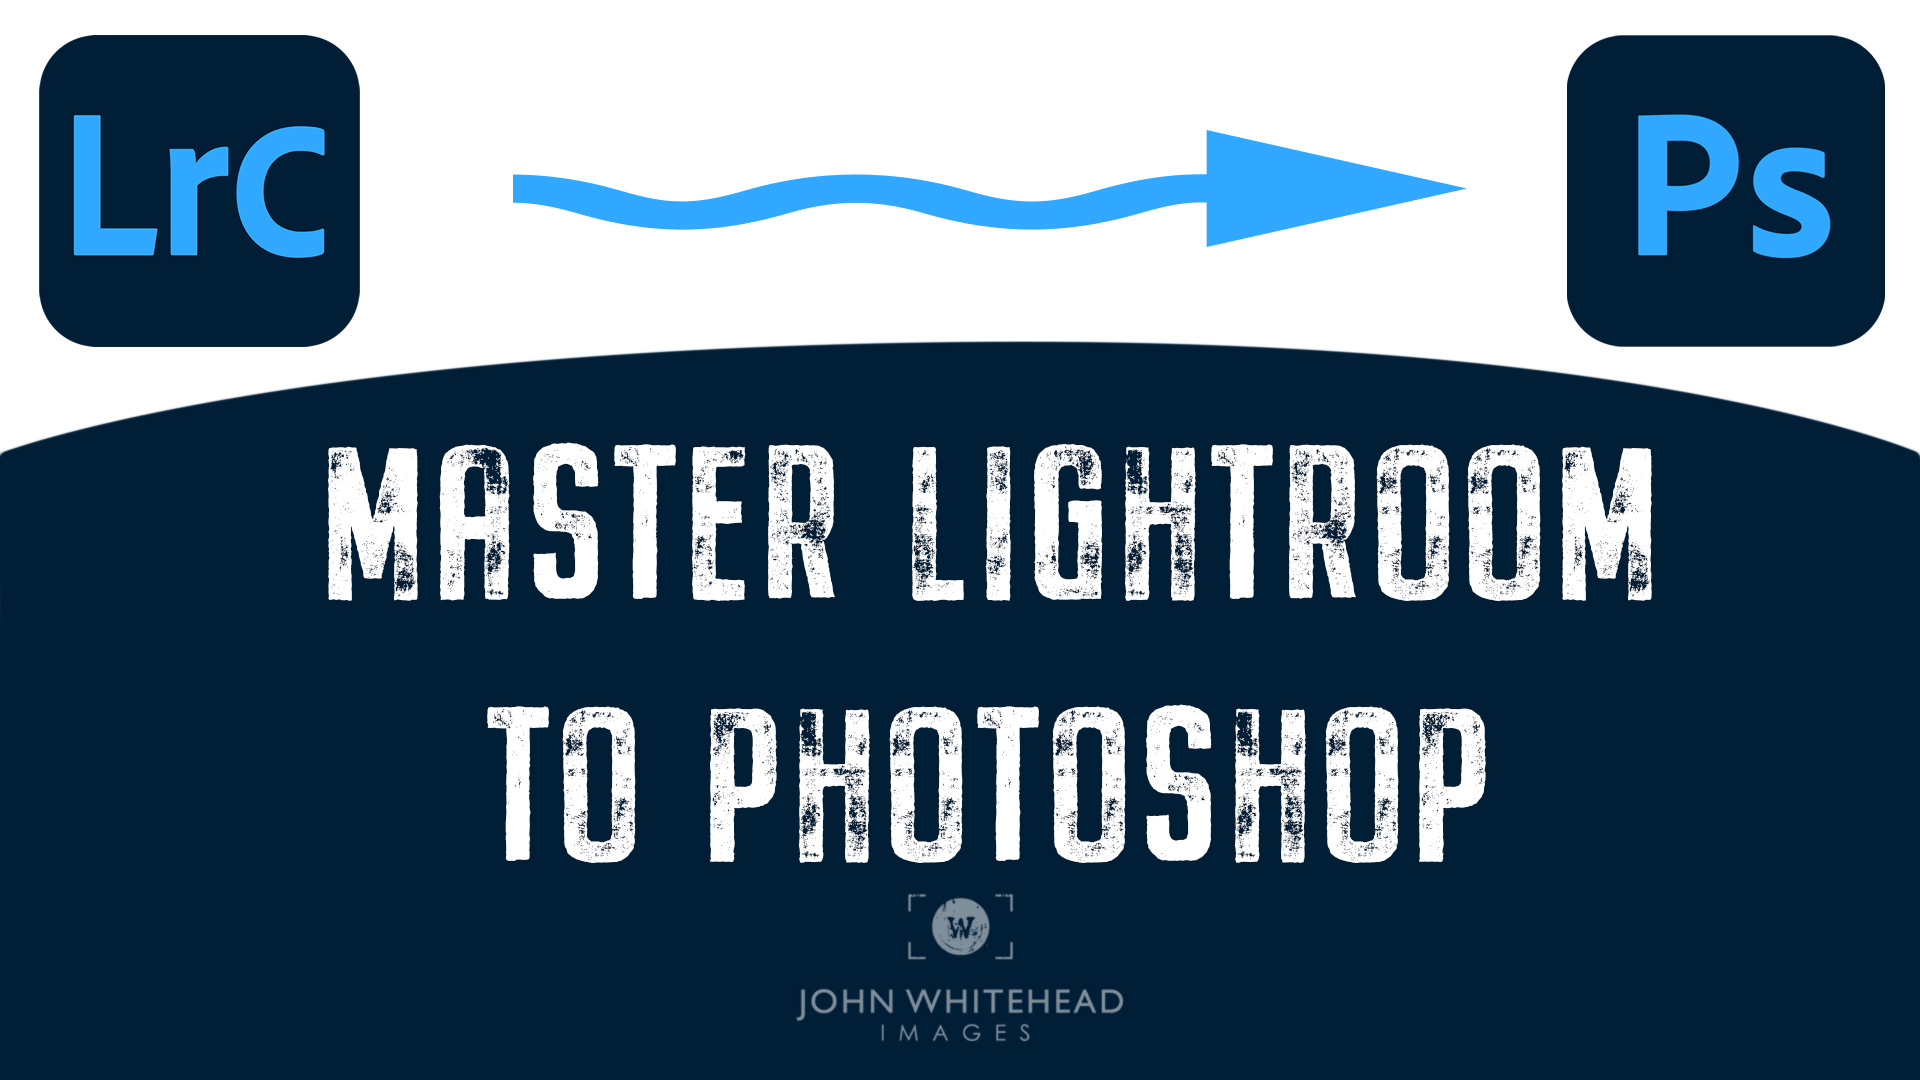 Master Lightroom to Photoshop Editing: Unlock Your Full Potential!<span class="rmp-archive-results-widget rmp-archive-results-widget--not-rated"><i class=" rmp-icon rmp-icon--ratings rmp-icon--star "></i><i class=" rmp-icon rmp-icon--ratings rmp-icon--star "></i><i class=" rmp-icon rmp-icon--ratings rmp-icon--star "></i><i class=" rmp-icon rmp-icon--ratings rmp-icon--star "></i><i class=" rmp-icon rmp-icon--ratings rmp-icon--star "></i> <span>0 (0)</span></span>